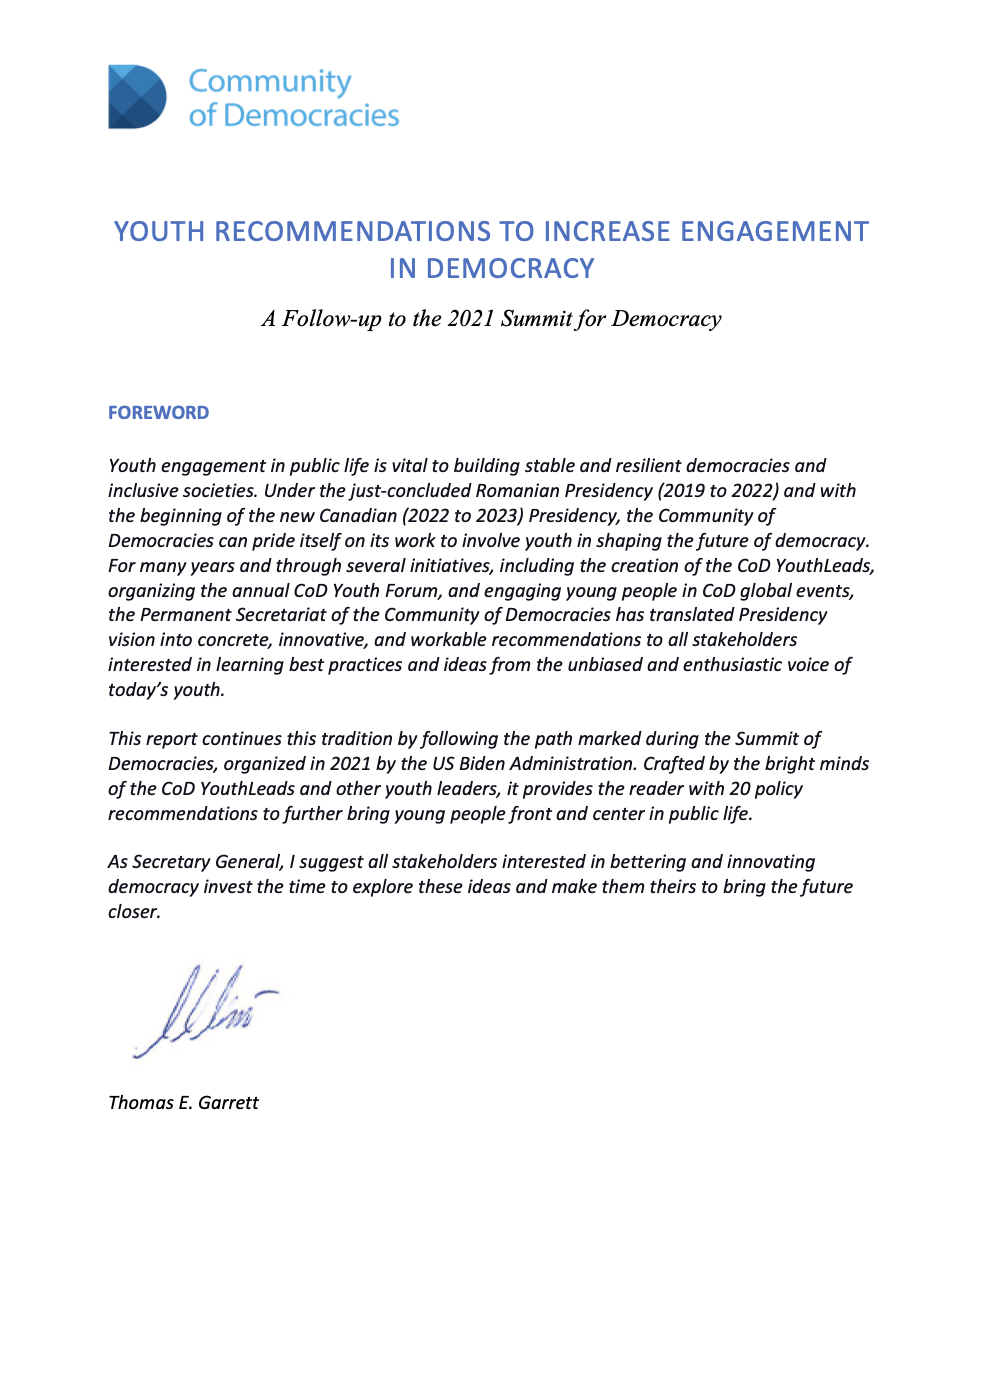 Youth Recommendations to Increase Engagement in Democracy